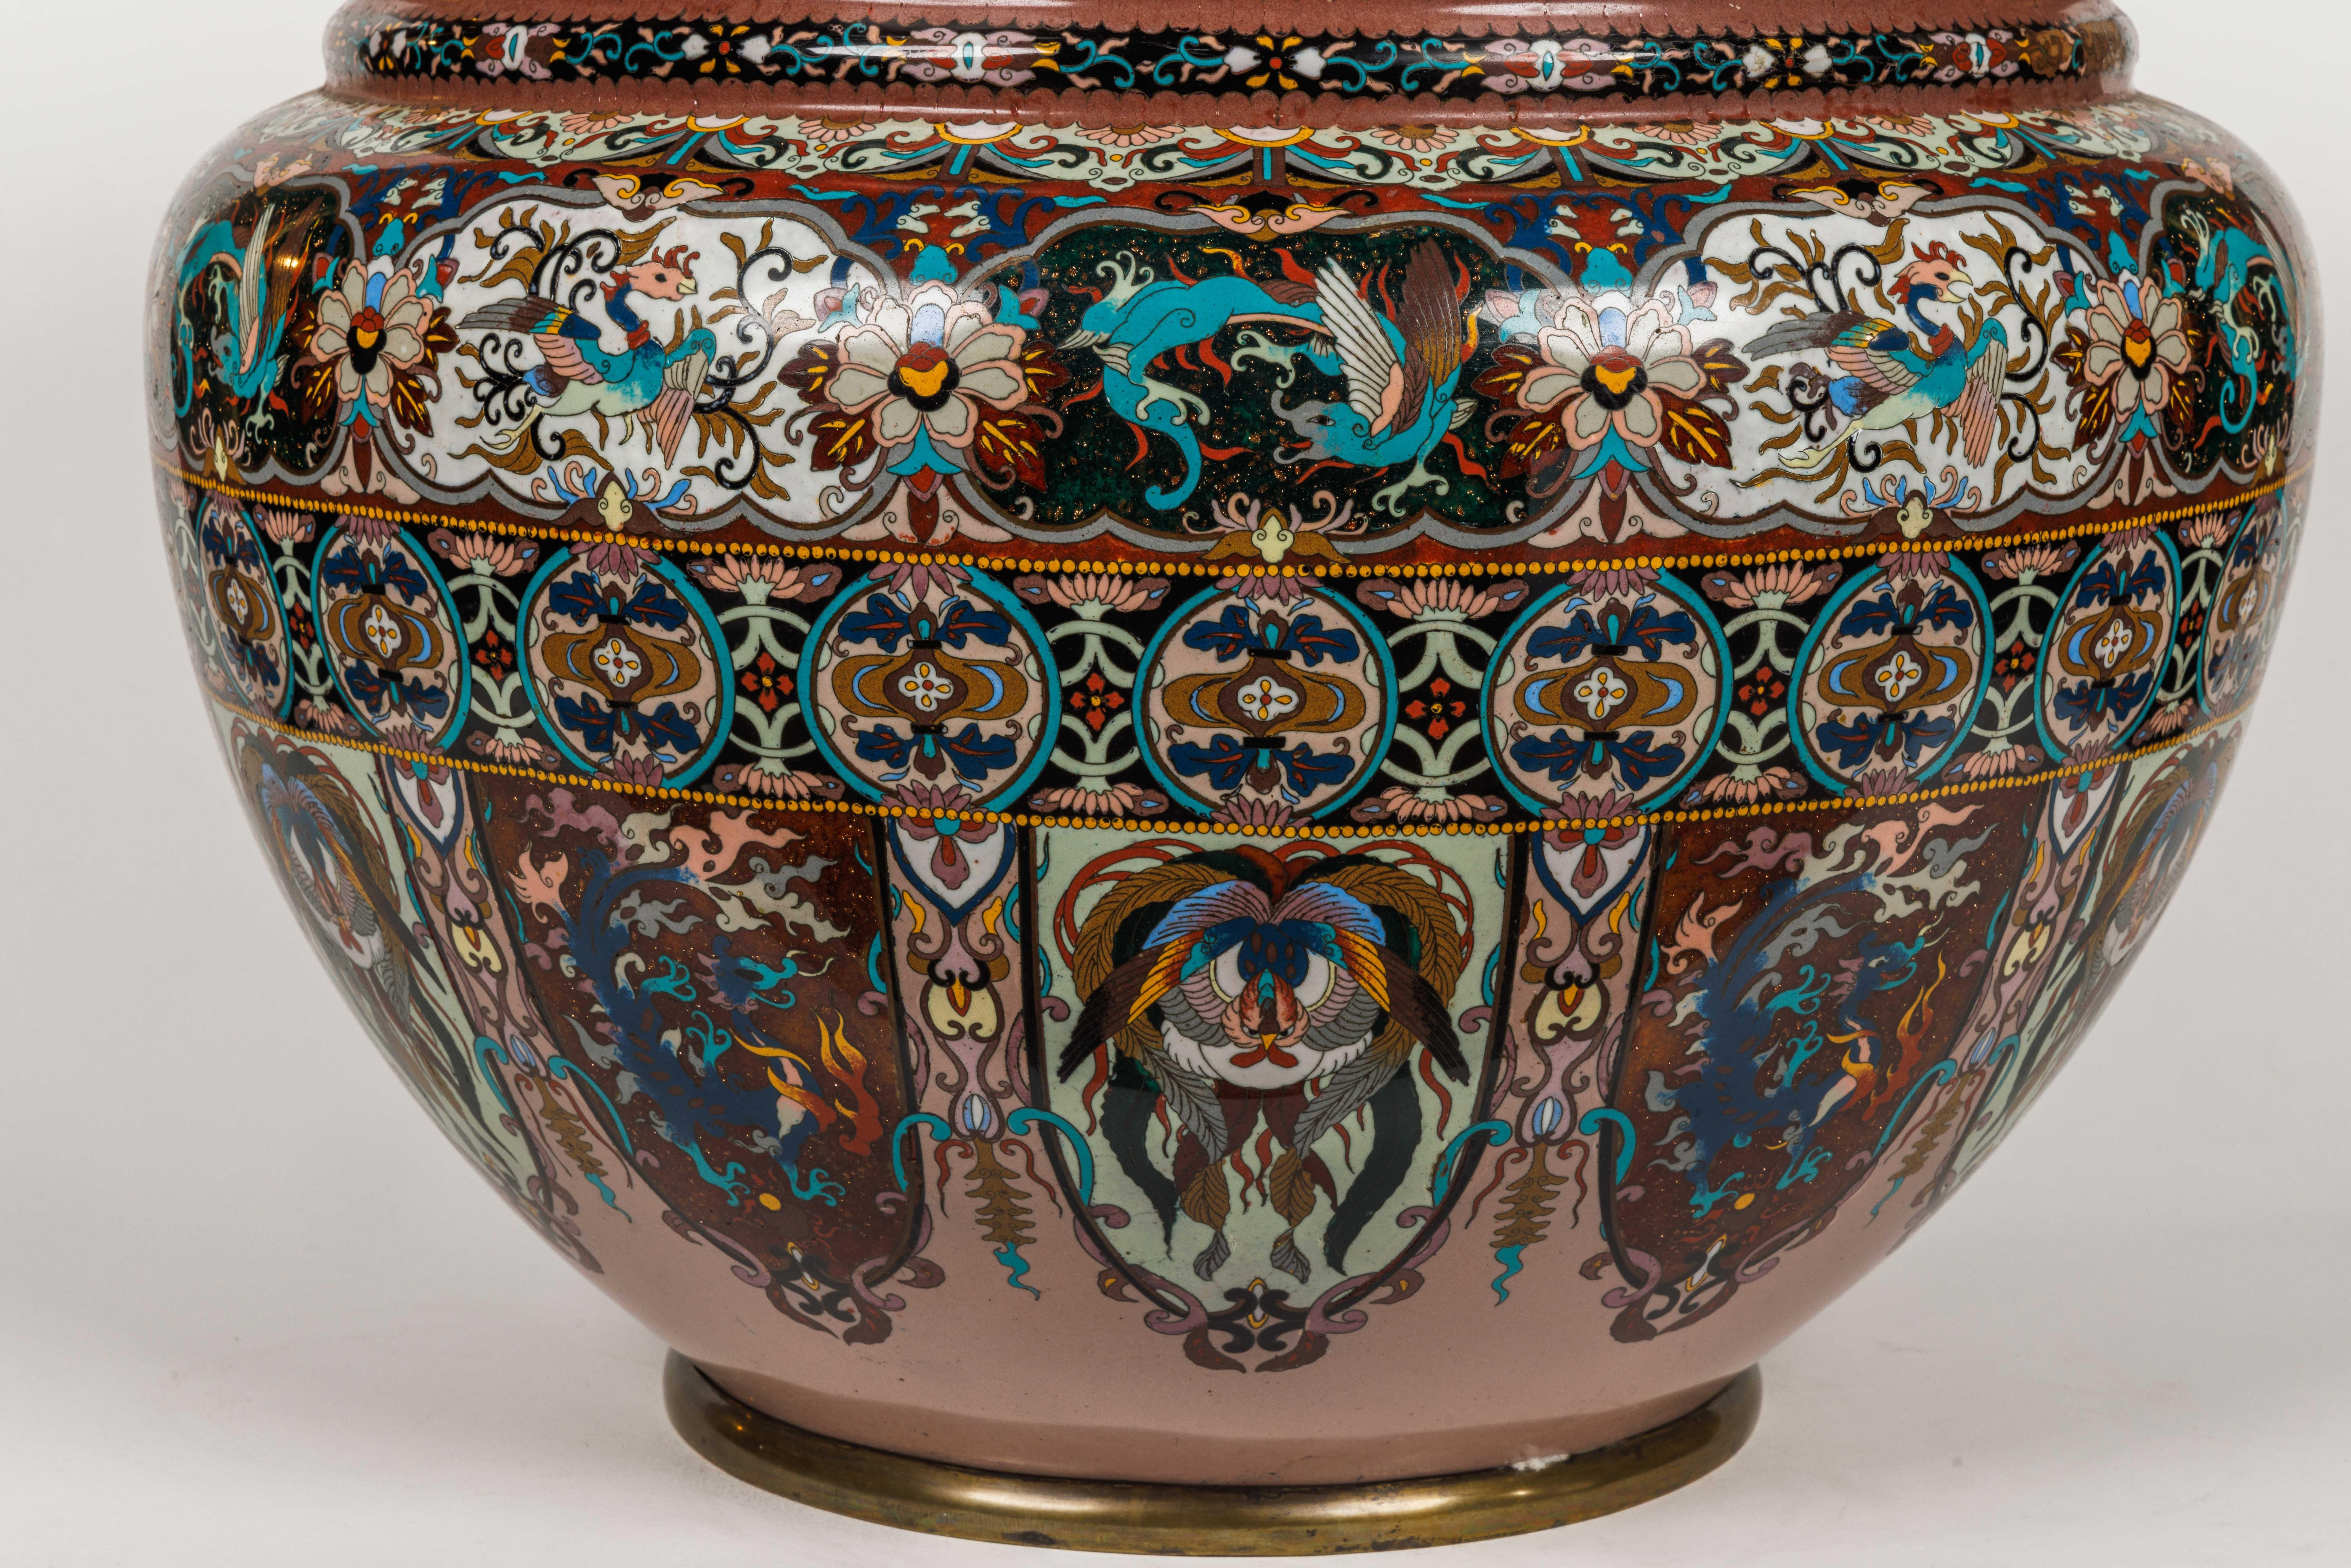 Monumental Meiji Period Japanese Cloisonne Enamel Jardiniere In Good Condition For Sale In New York, NY